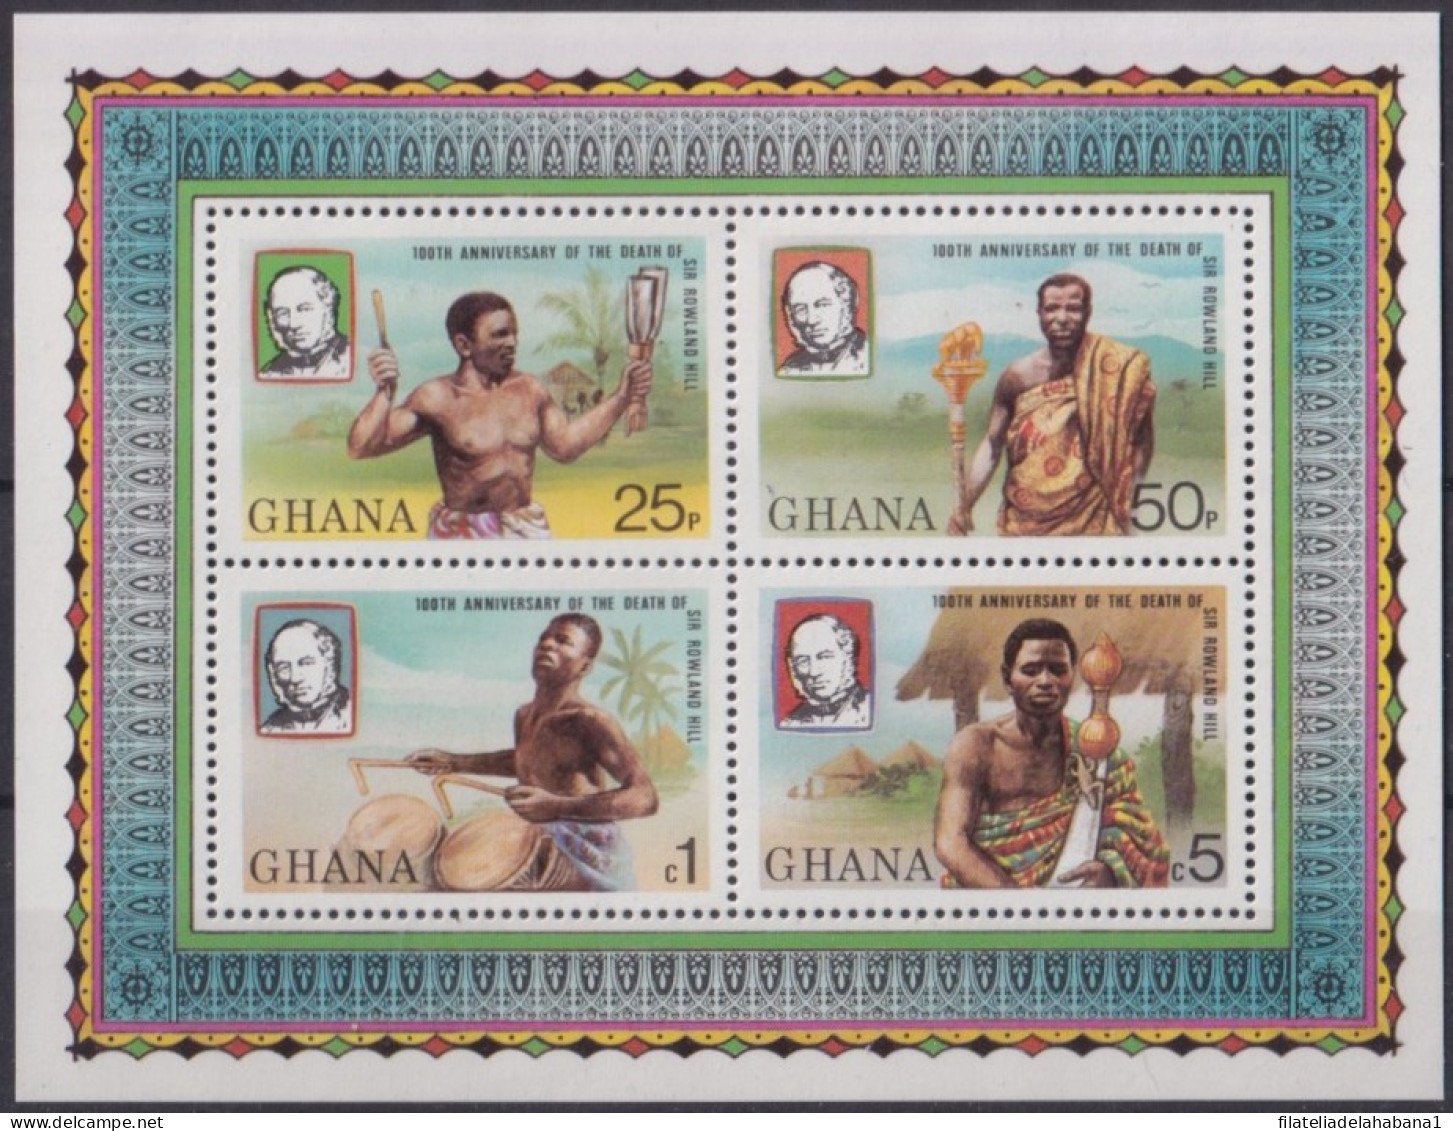 F-EX42631 GHANA MNH 1979 ROWLAND HILL CENTENARY OF DEATH. TRADITIONAL MUSIC.  - Rowland Hill